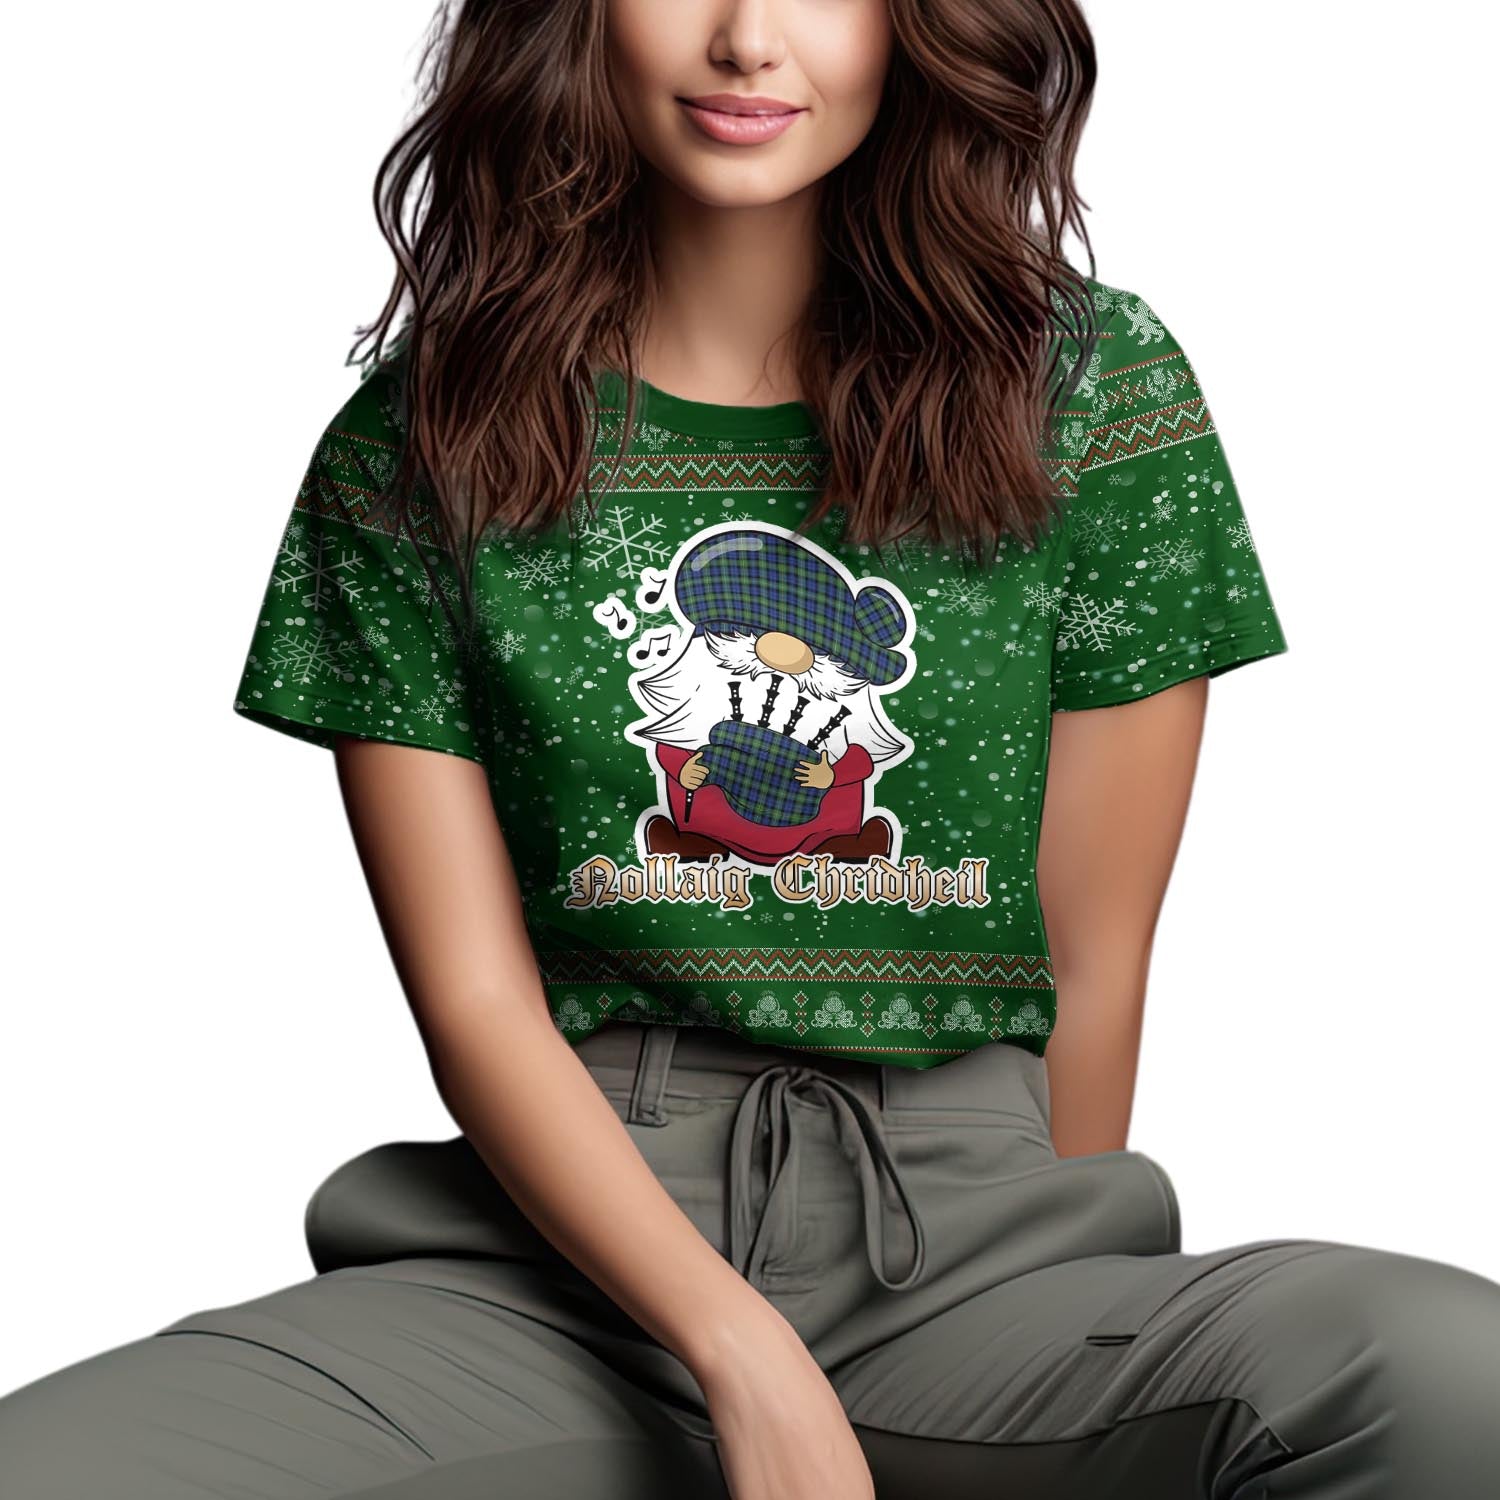 Campbell Argyll Ancient Clan Christmas Family T-Shirt with Funny Gnome Playing Bagpipes Women's Shirt Green - Tartanvibesclothing